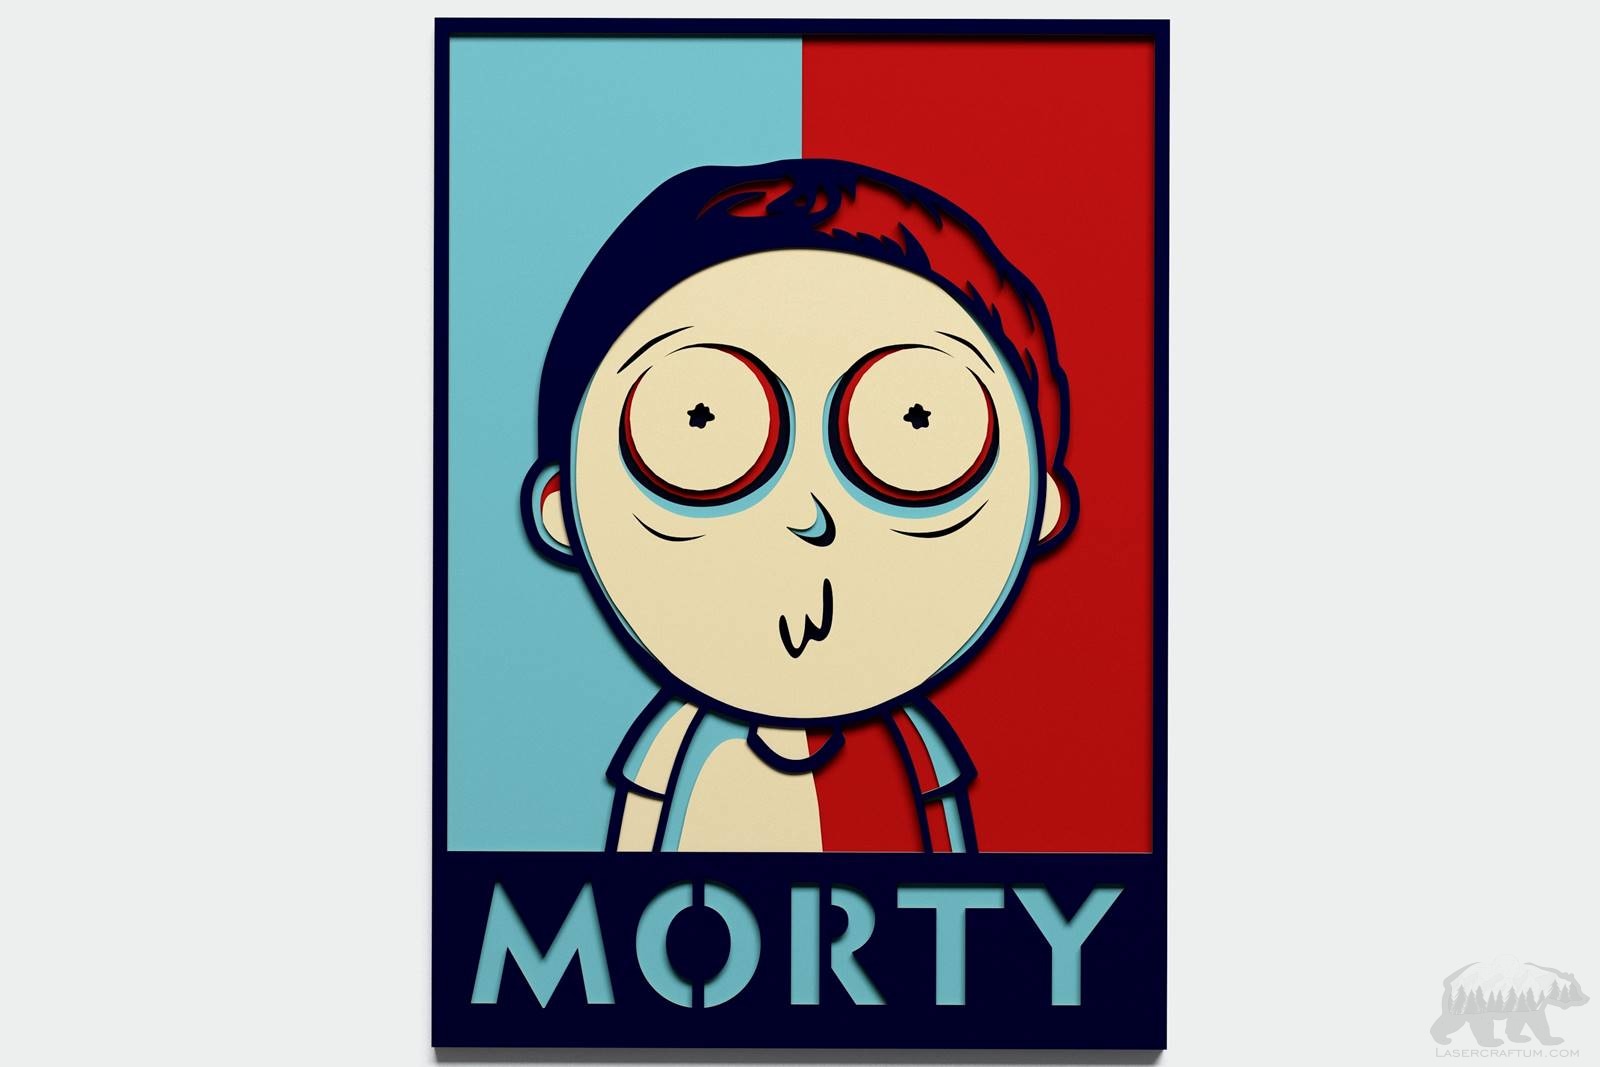 Morty Layered Design for cutting